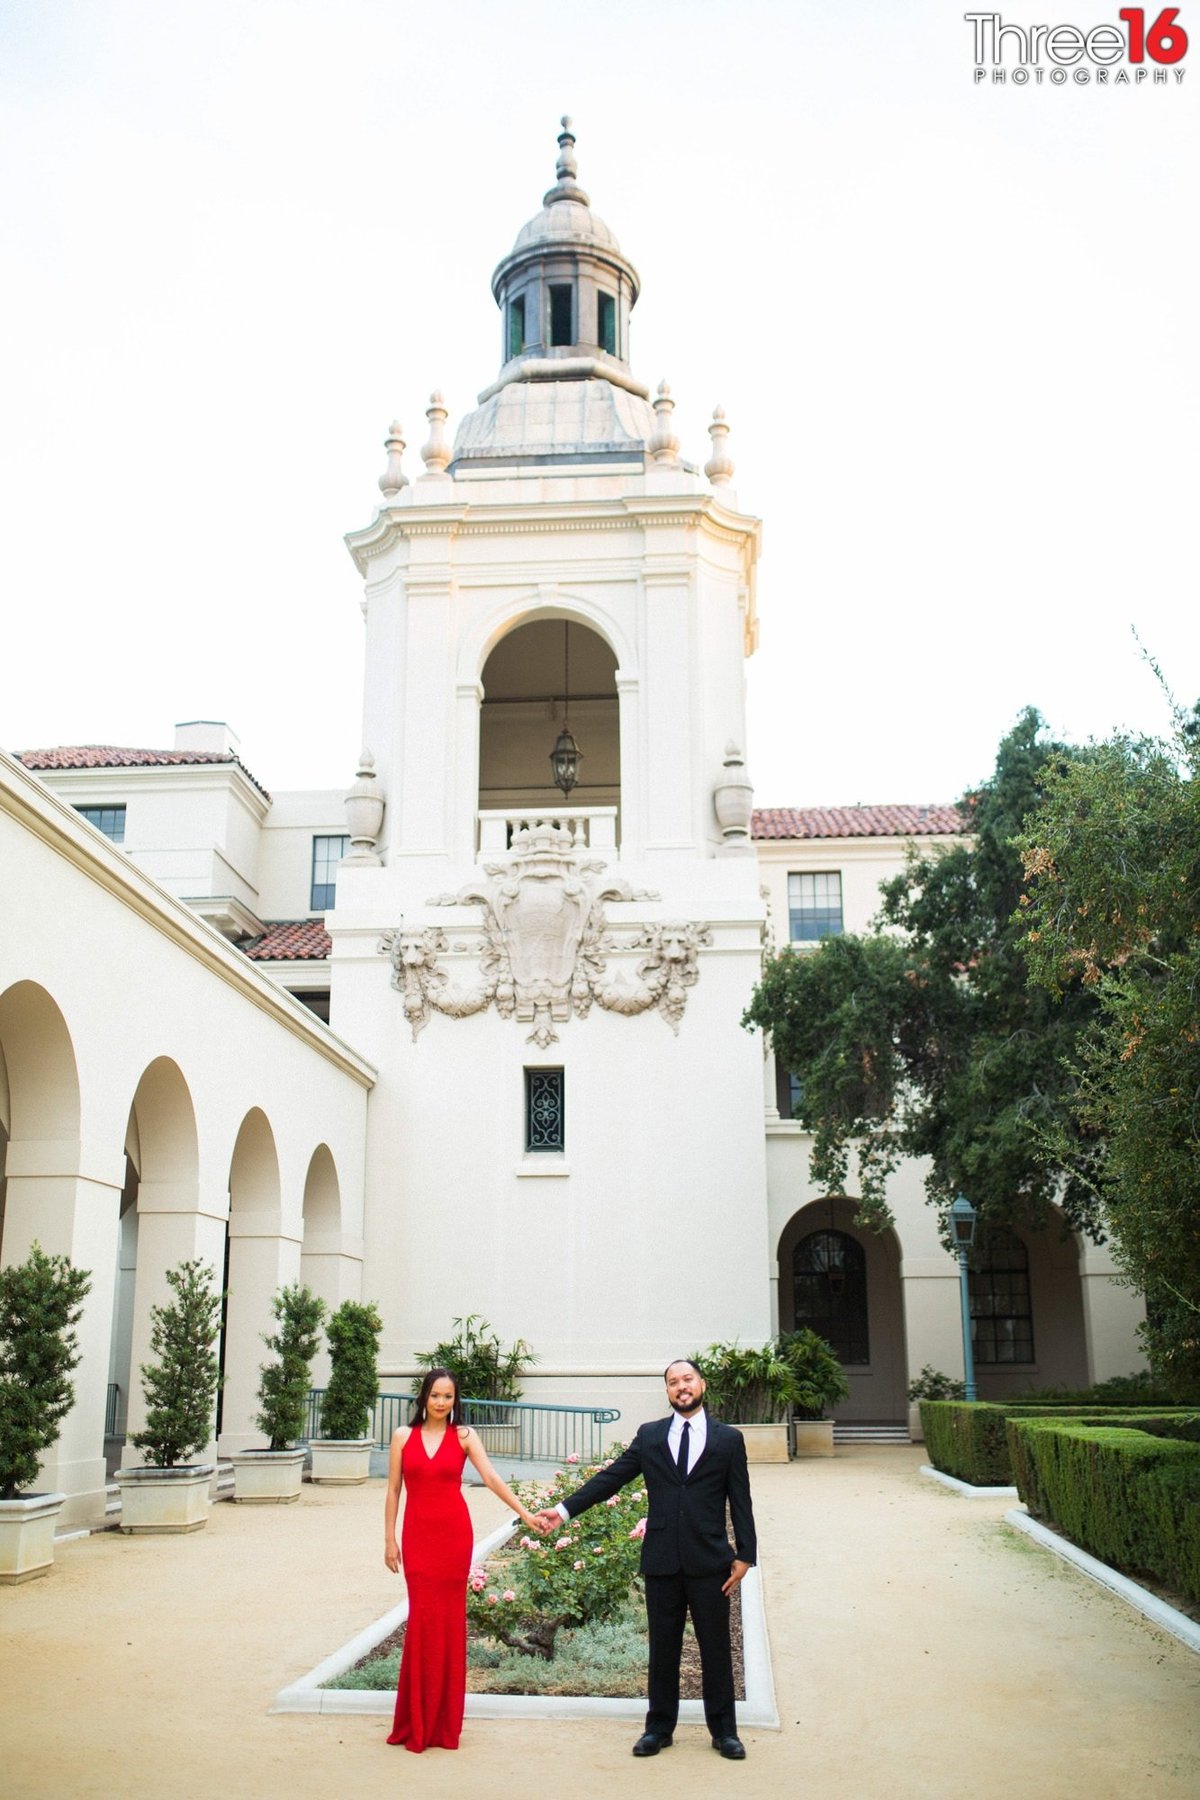 Engaged couple hold hands as they pose for photo shoot in the Pasadena City Hall garden courtyard